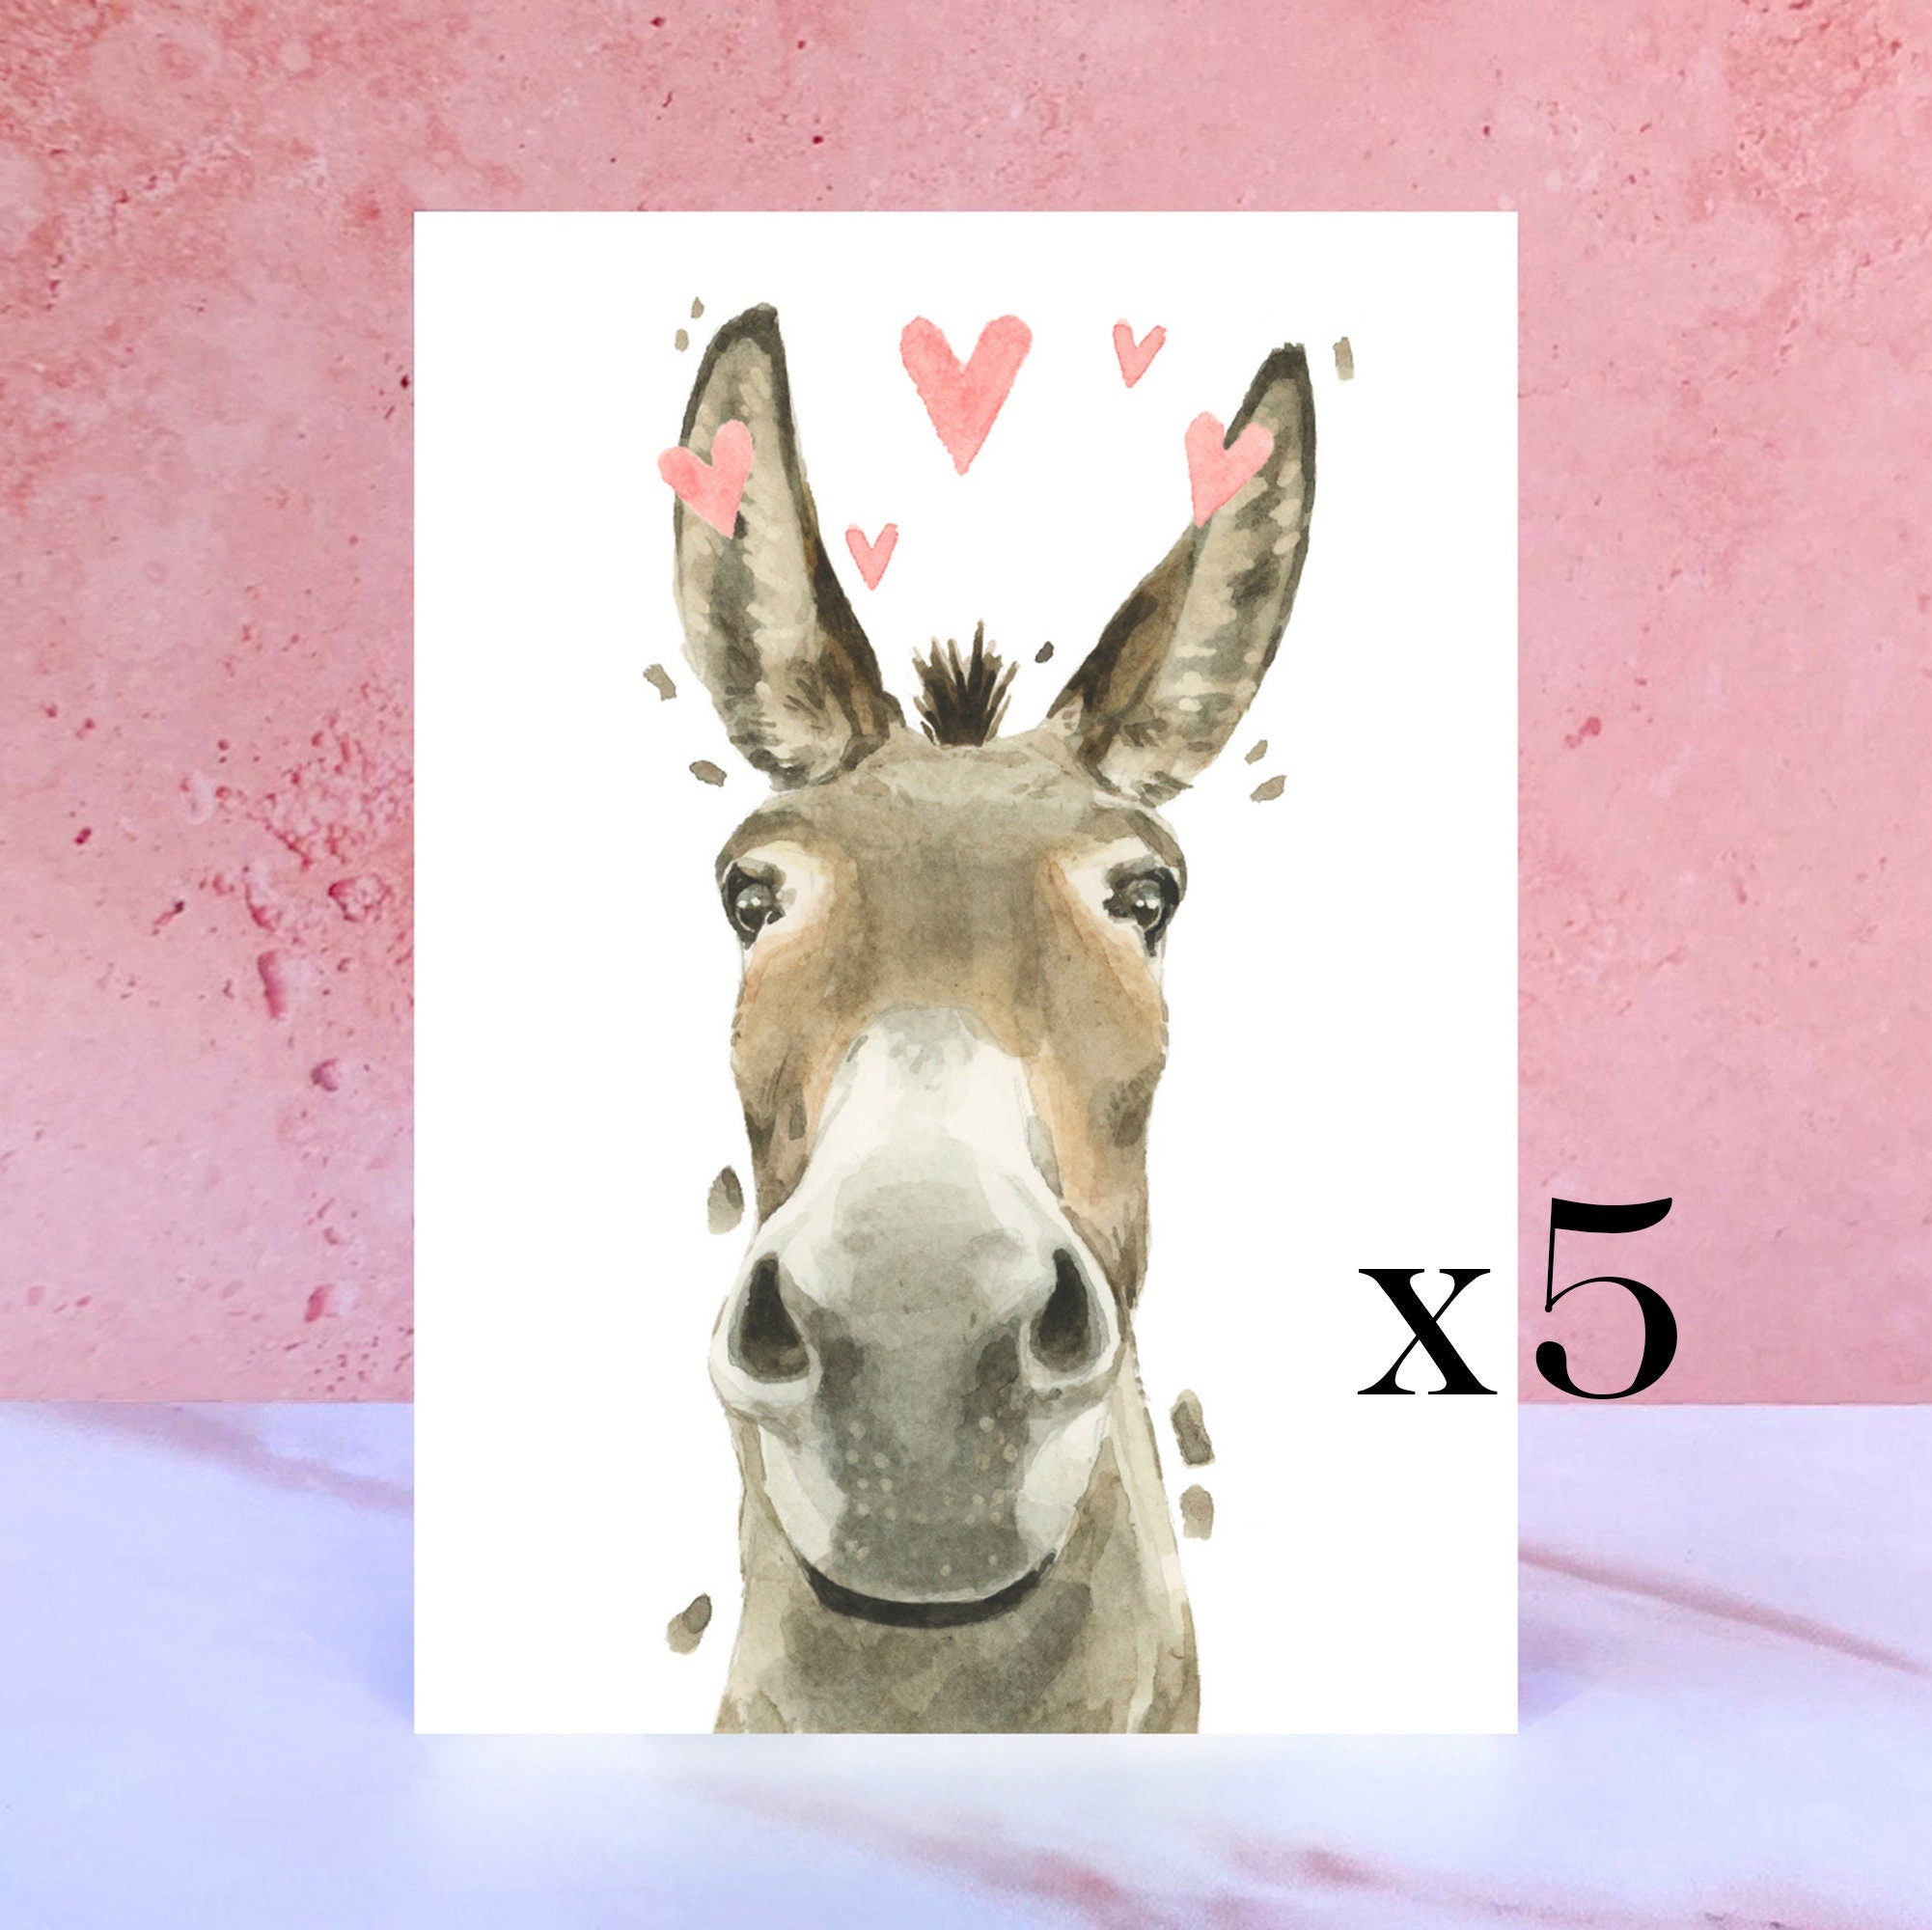 Pack of 5 Donkey Licks & Kisses Card for Valentines and Anniversaries from the Farm Animal Collection